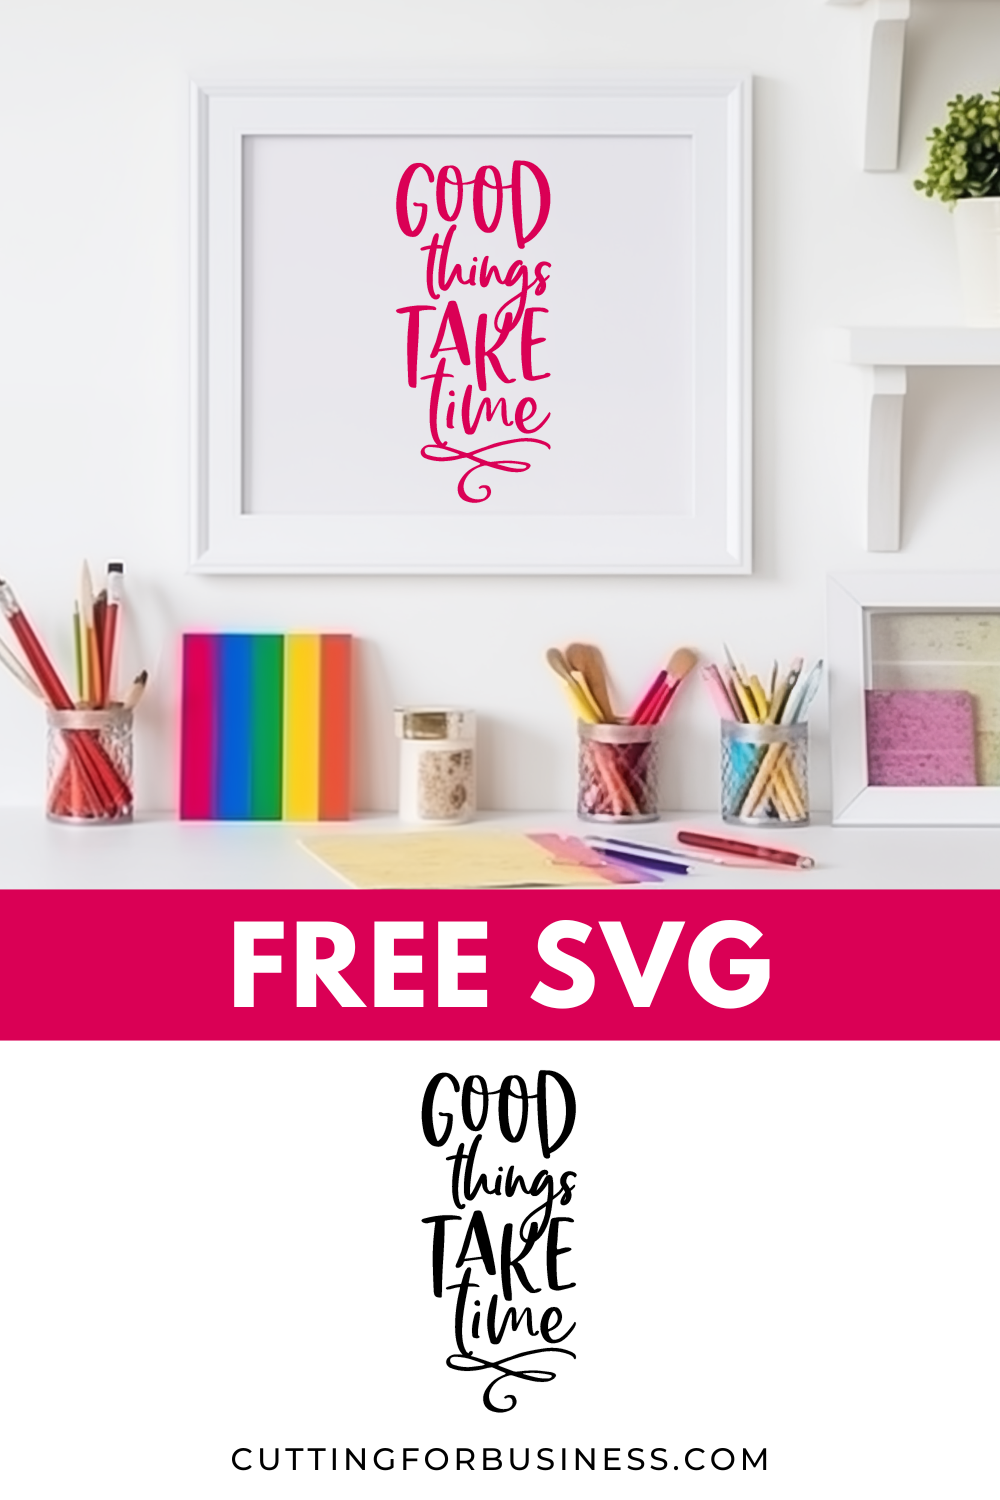 Free SVG - Good Things Take Time - cuttingforbusiness.com